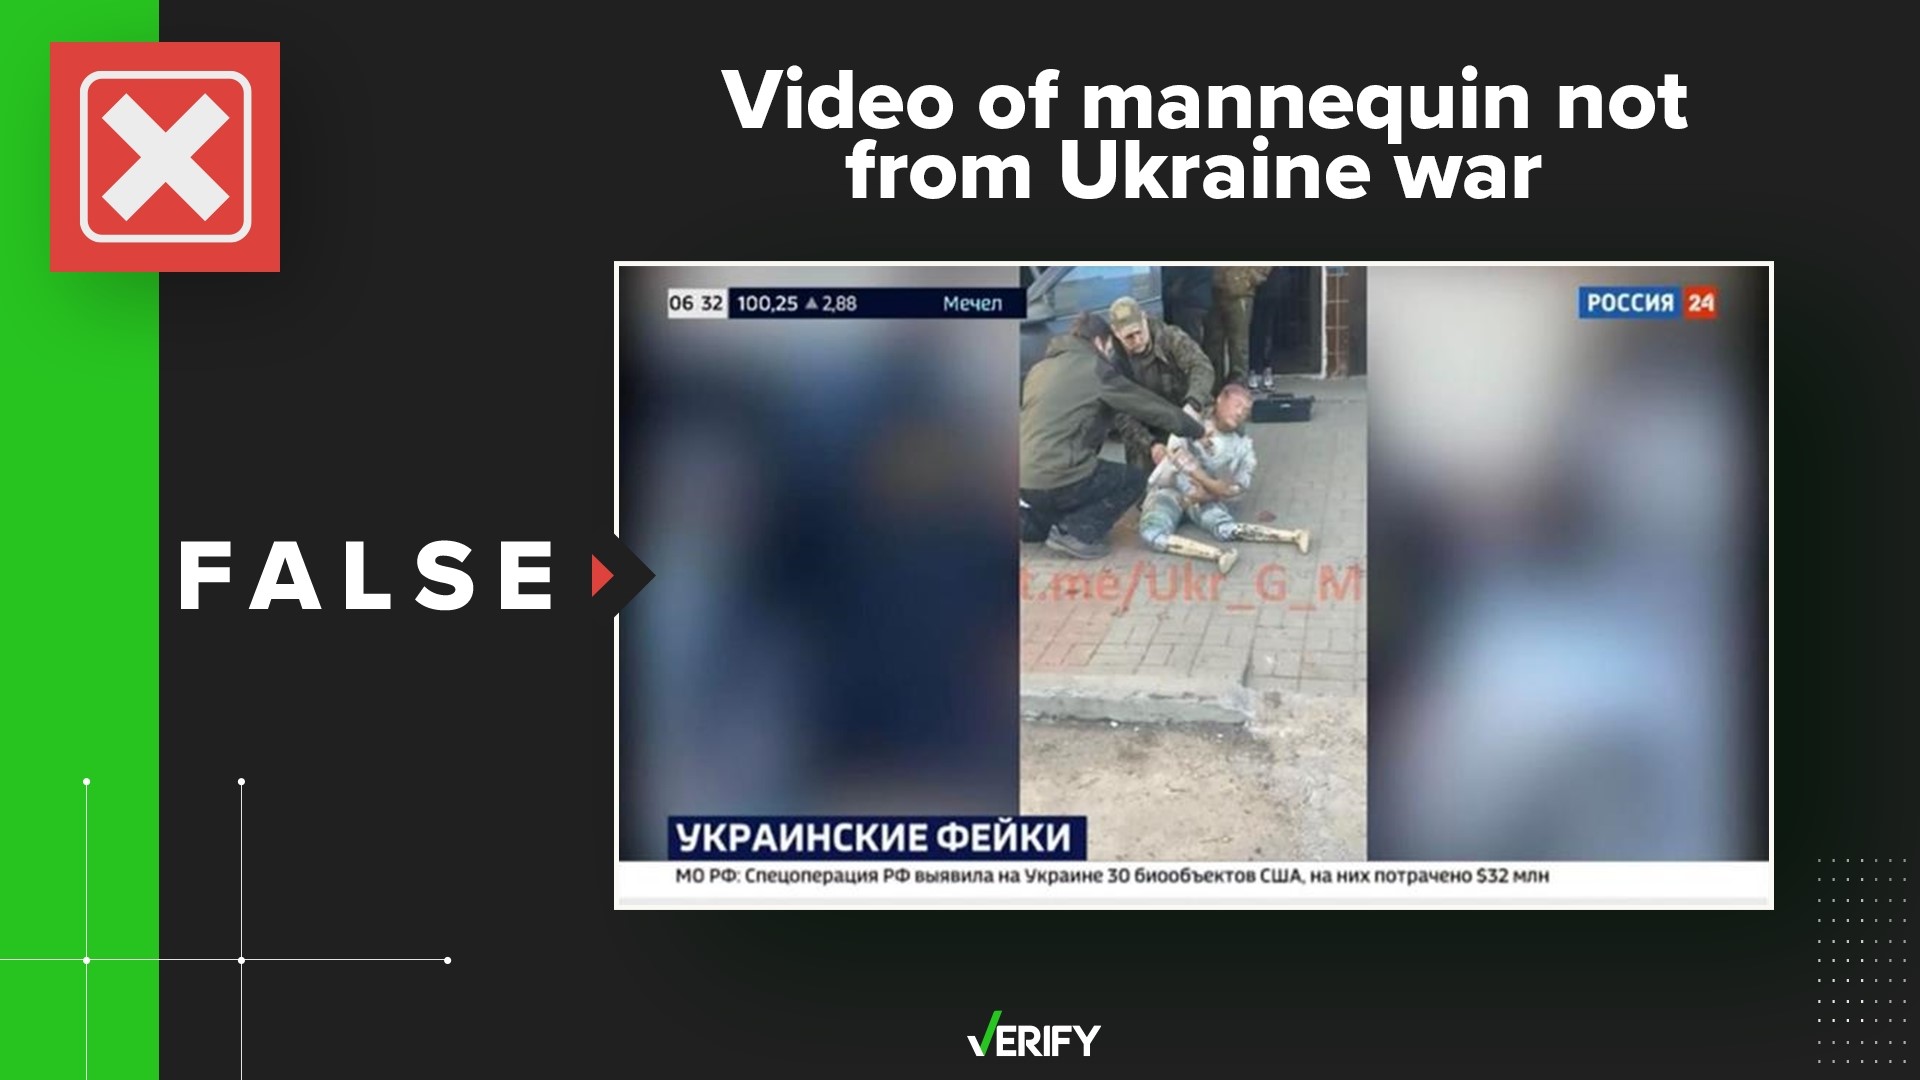 Does the footage aired by Russia-24 show the Ukrainian military using mannequins to exaggerate war casualties? The VERIFY team confirms this is false.